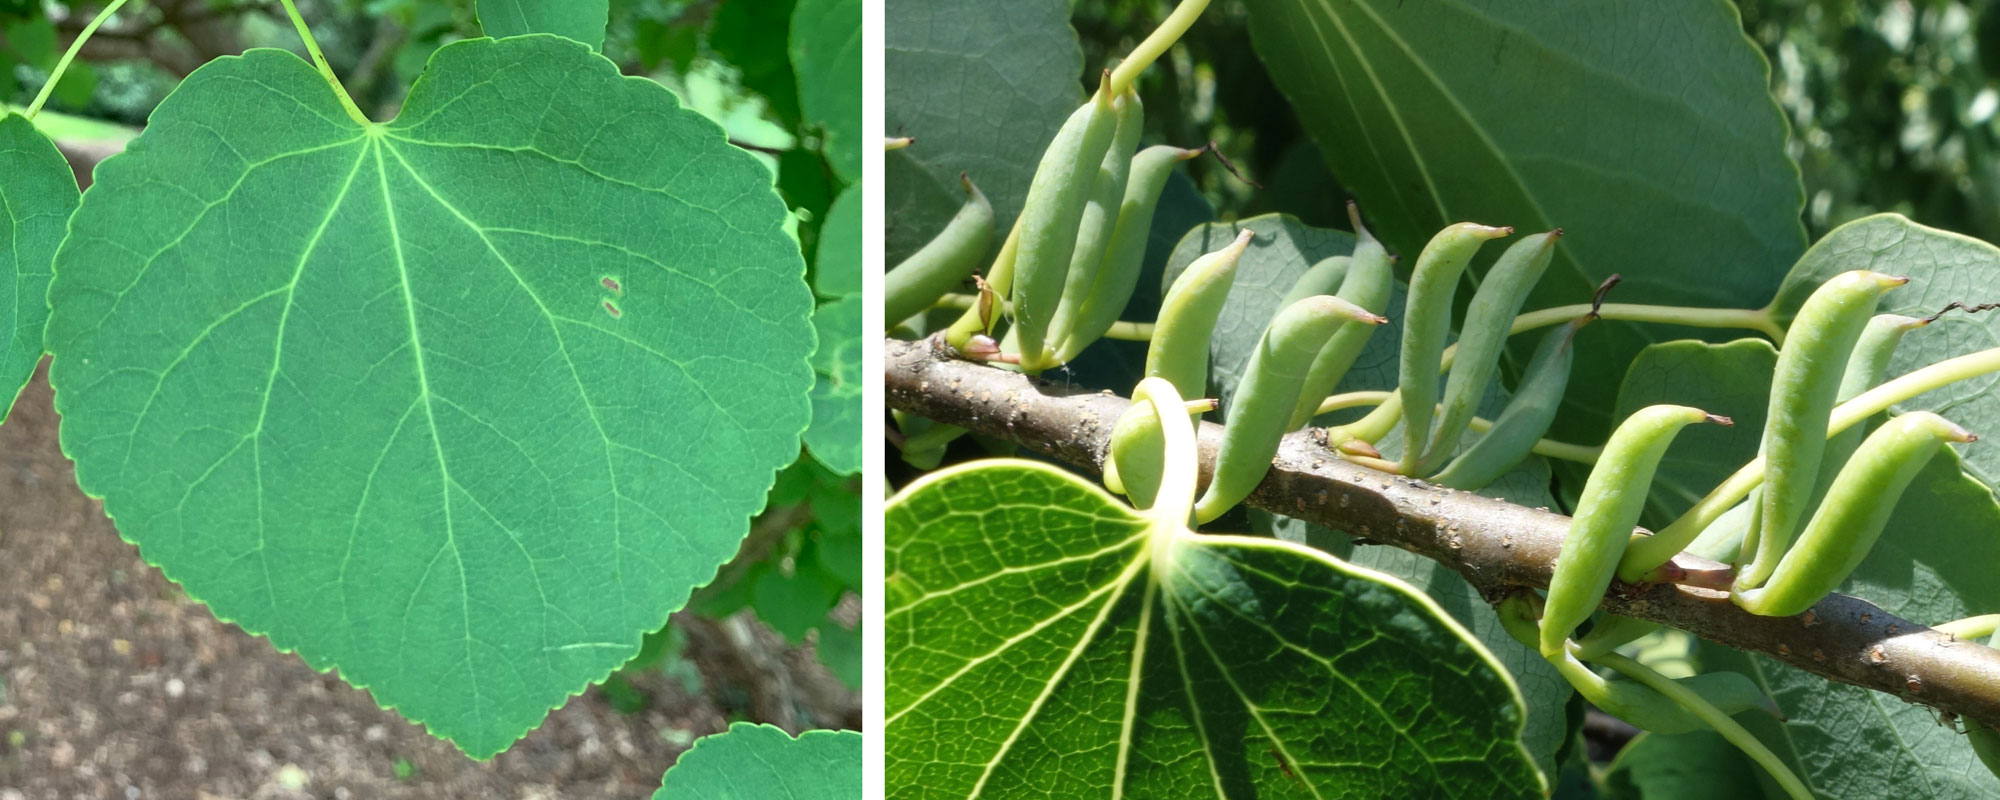 2-panel figure showing photos of modern katsura. Panel 1: Photograph of a leaf. The leaf is broadly cordate the palmate basal venation, a toothed margin, and a petiole. Panel 2: Fruits attached to a branch. The immature fruits are green and elongated immature capsules. Each bends at a nearly 90-degree angle at its tip.